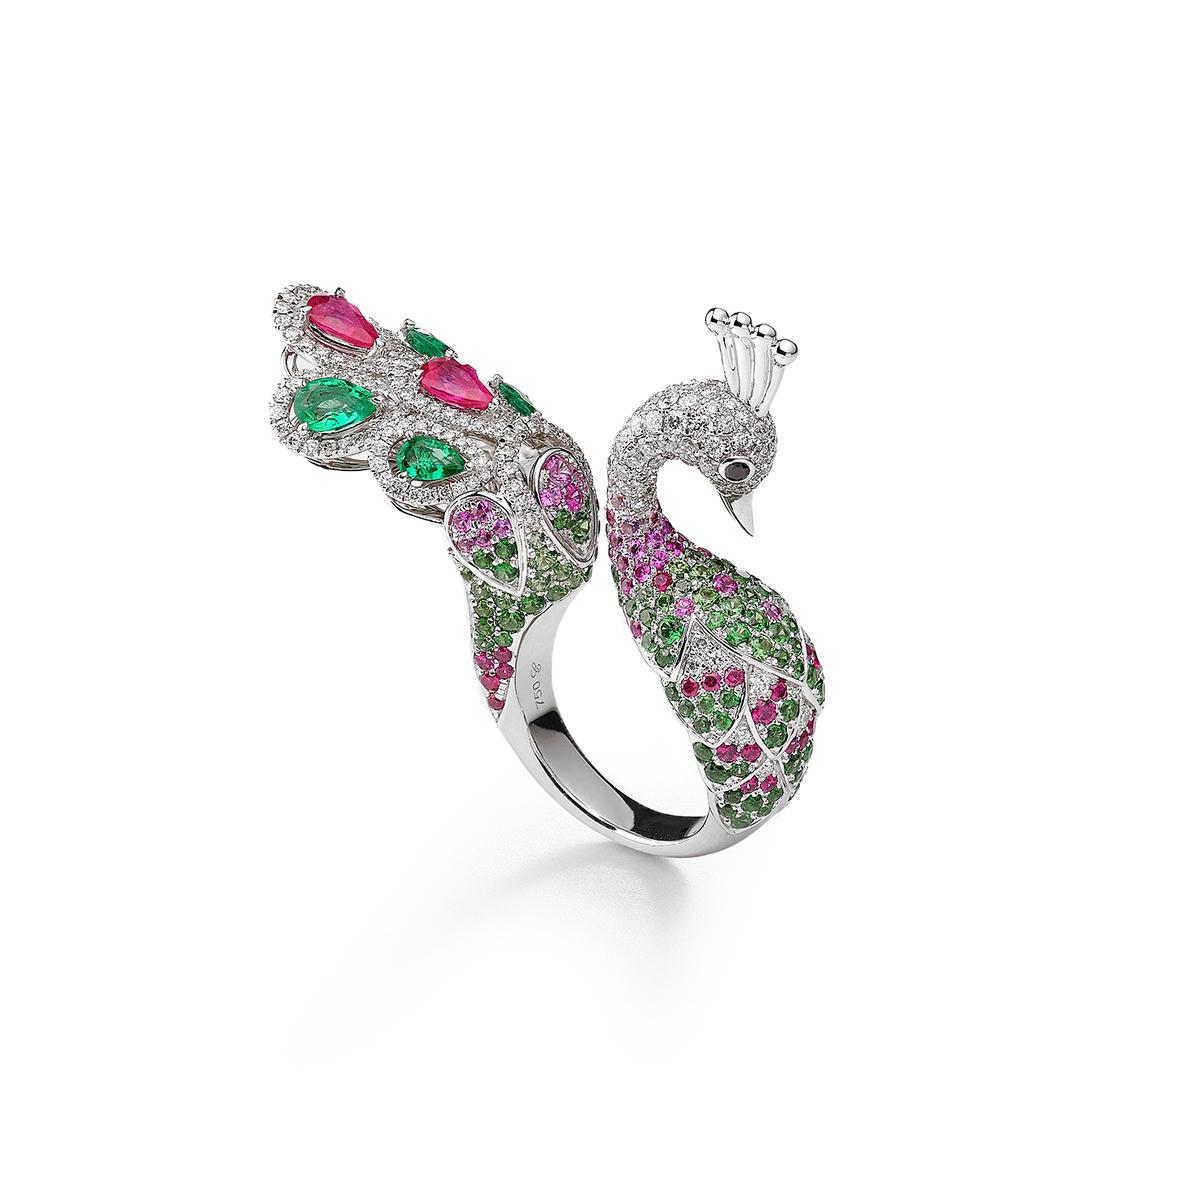 Peacok ring in 18kt white gold set with 234 diamonds 1.61 cts, 4 pear-shaped  cut emeralds 0.99 cts , 2 pear-shaped cut rubies 0.89 cts, 56 pink sapphires 0.90 cts,  31 rubies 0.47 cts, 116 tzavorites 1.95 cts and 2 black diamonds 0.04 cts  Size 55 